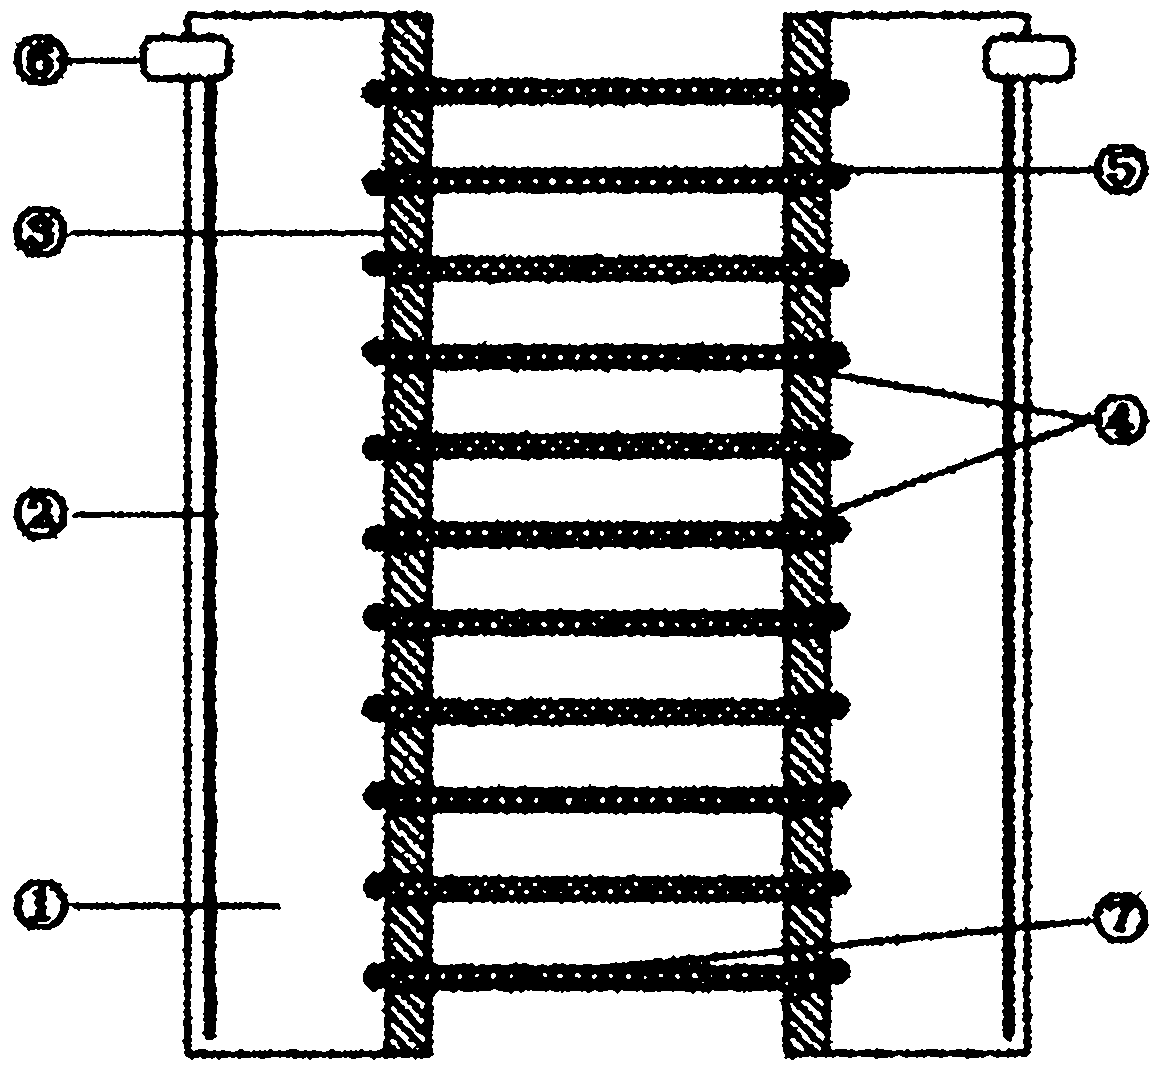 Miniature capillary array device for isoelectric focusing electrophoresis